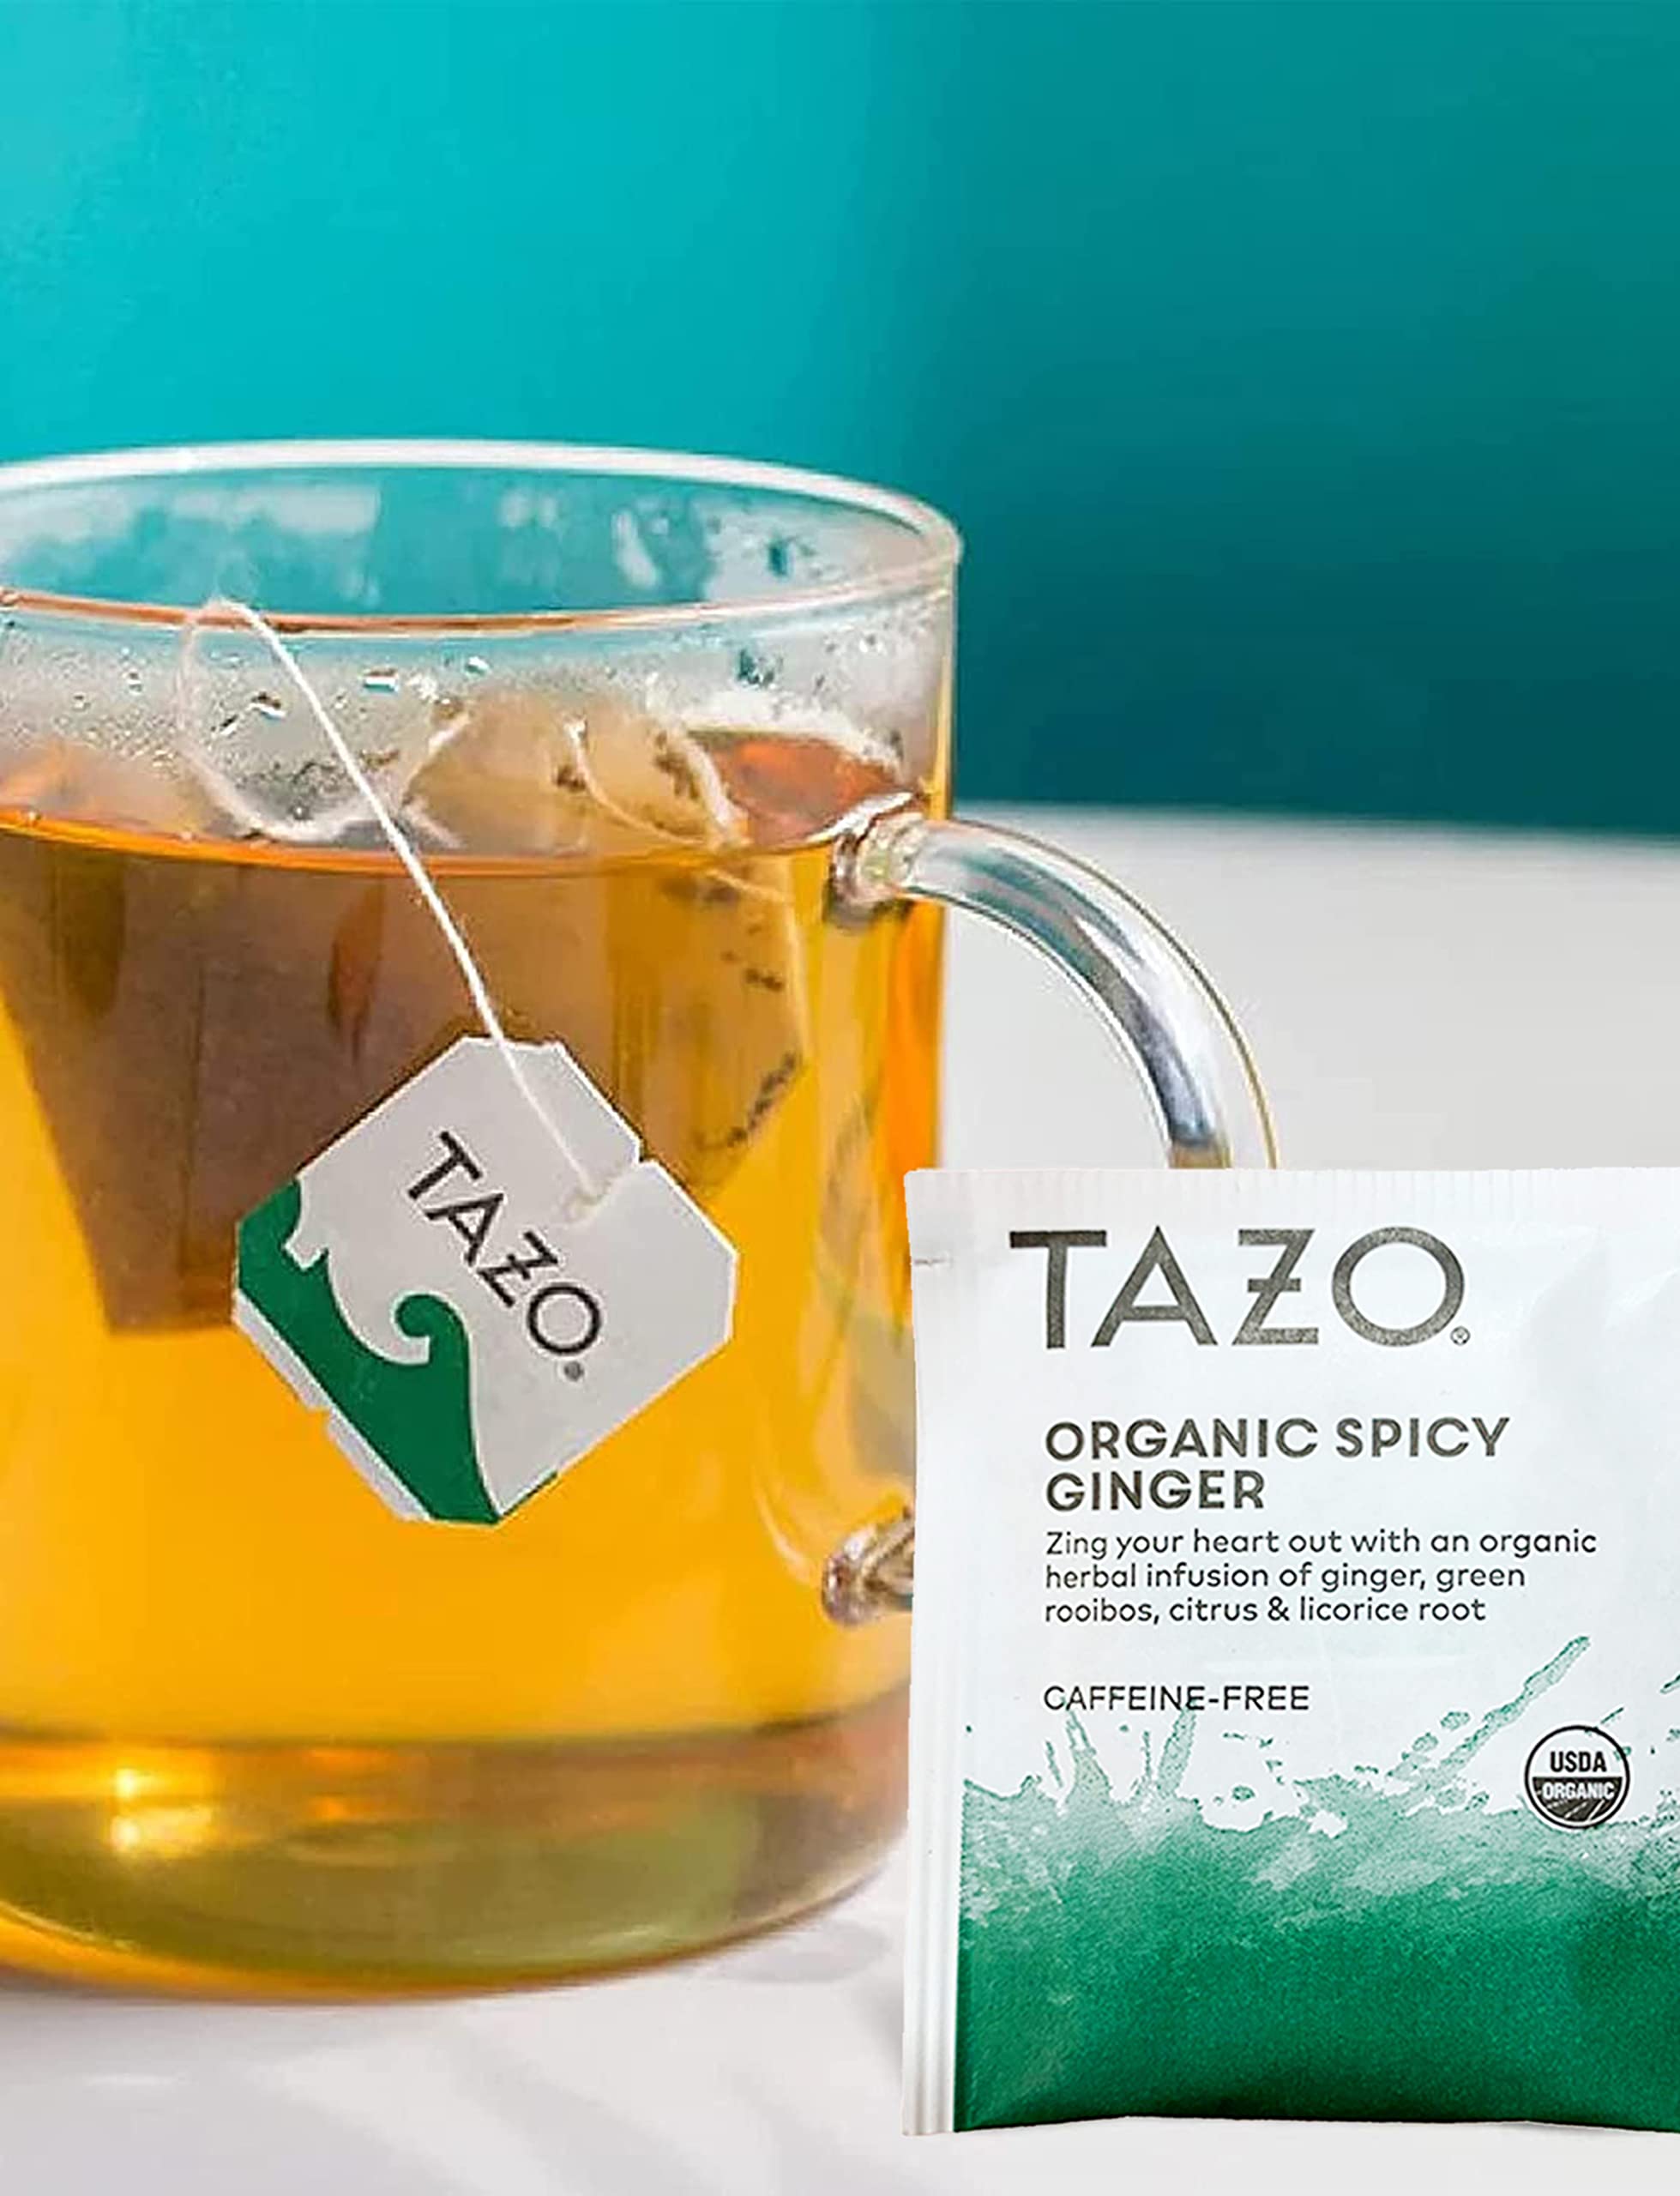 Eva's Gift Universe, Tazo Tea Bags Sampler Variety in Bamboo Tea Bag Organizer (80 Count) 16 Different Flavors Gifts for Parents Mom Dad Tea Lovers Couples